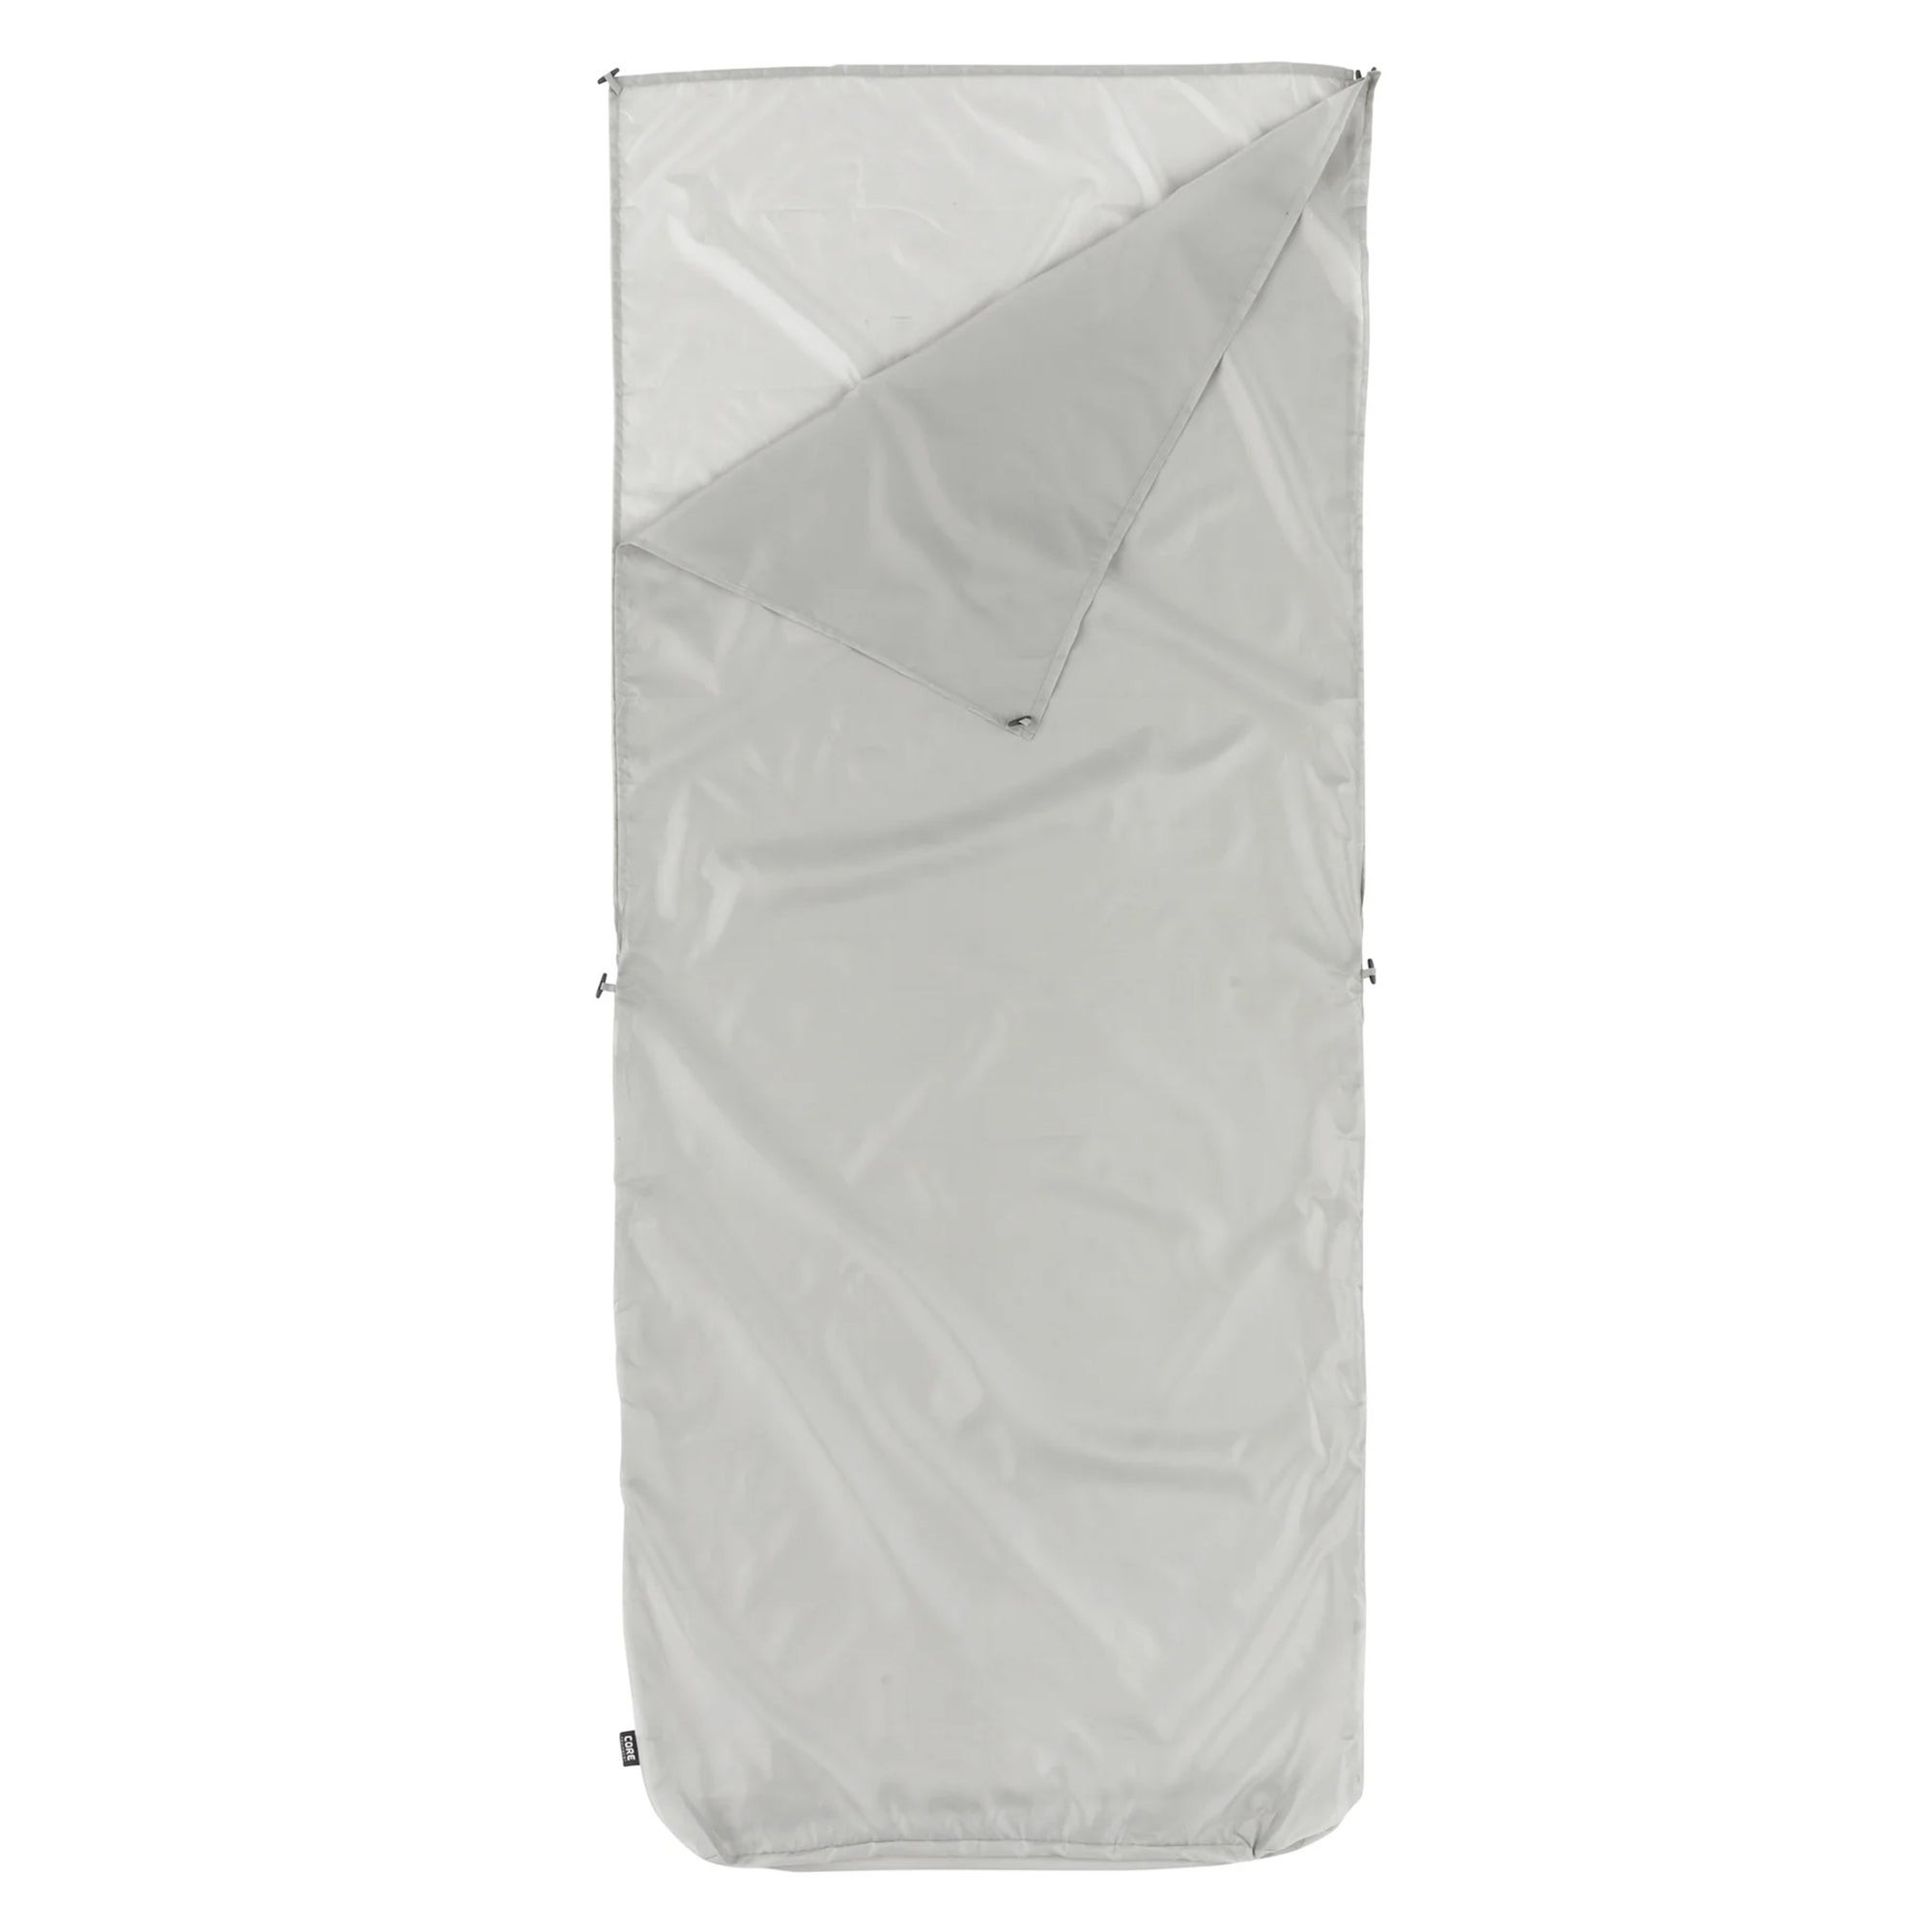 Warm Weather Sleeping Bag Liner Accessory